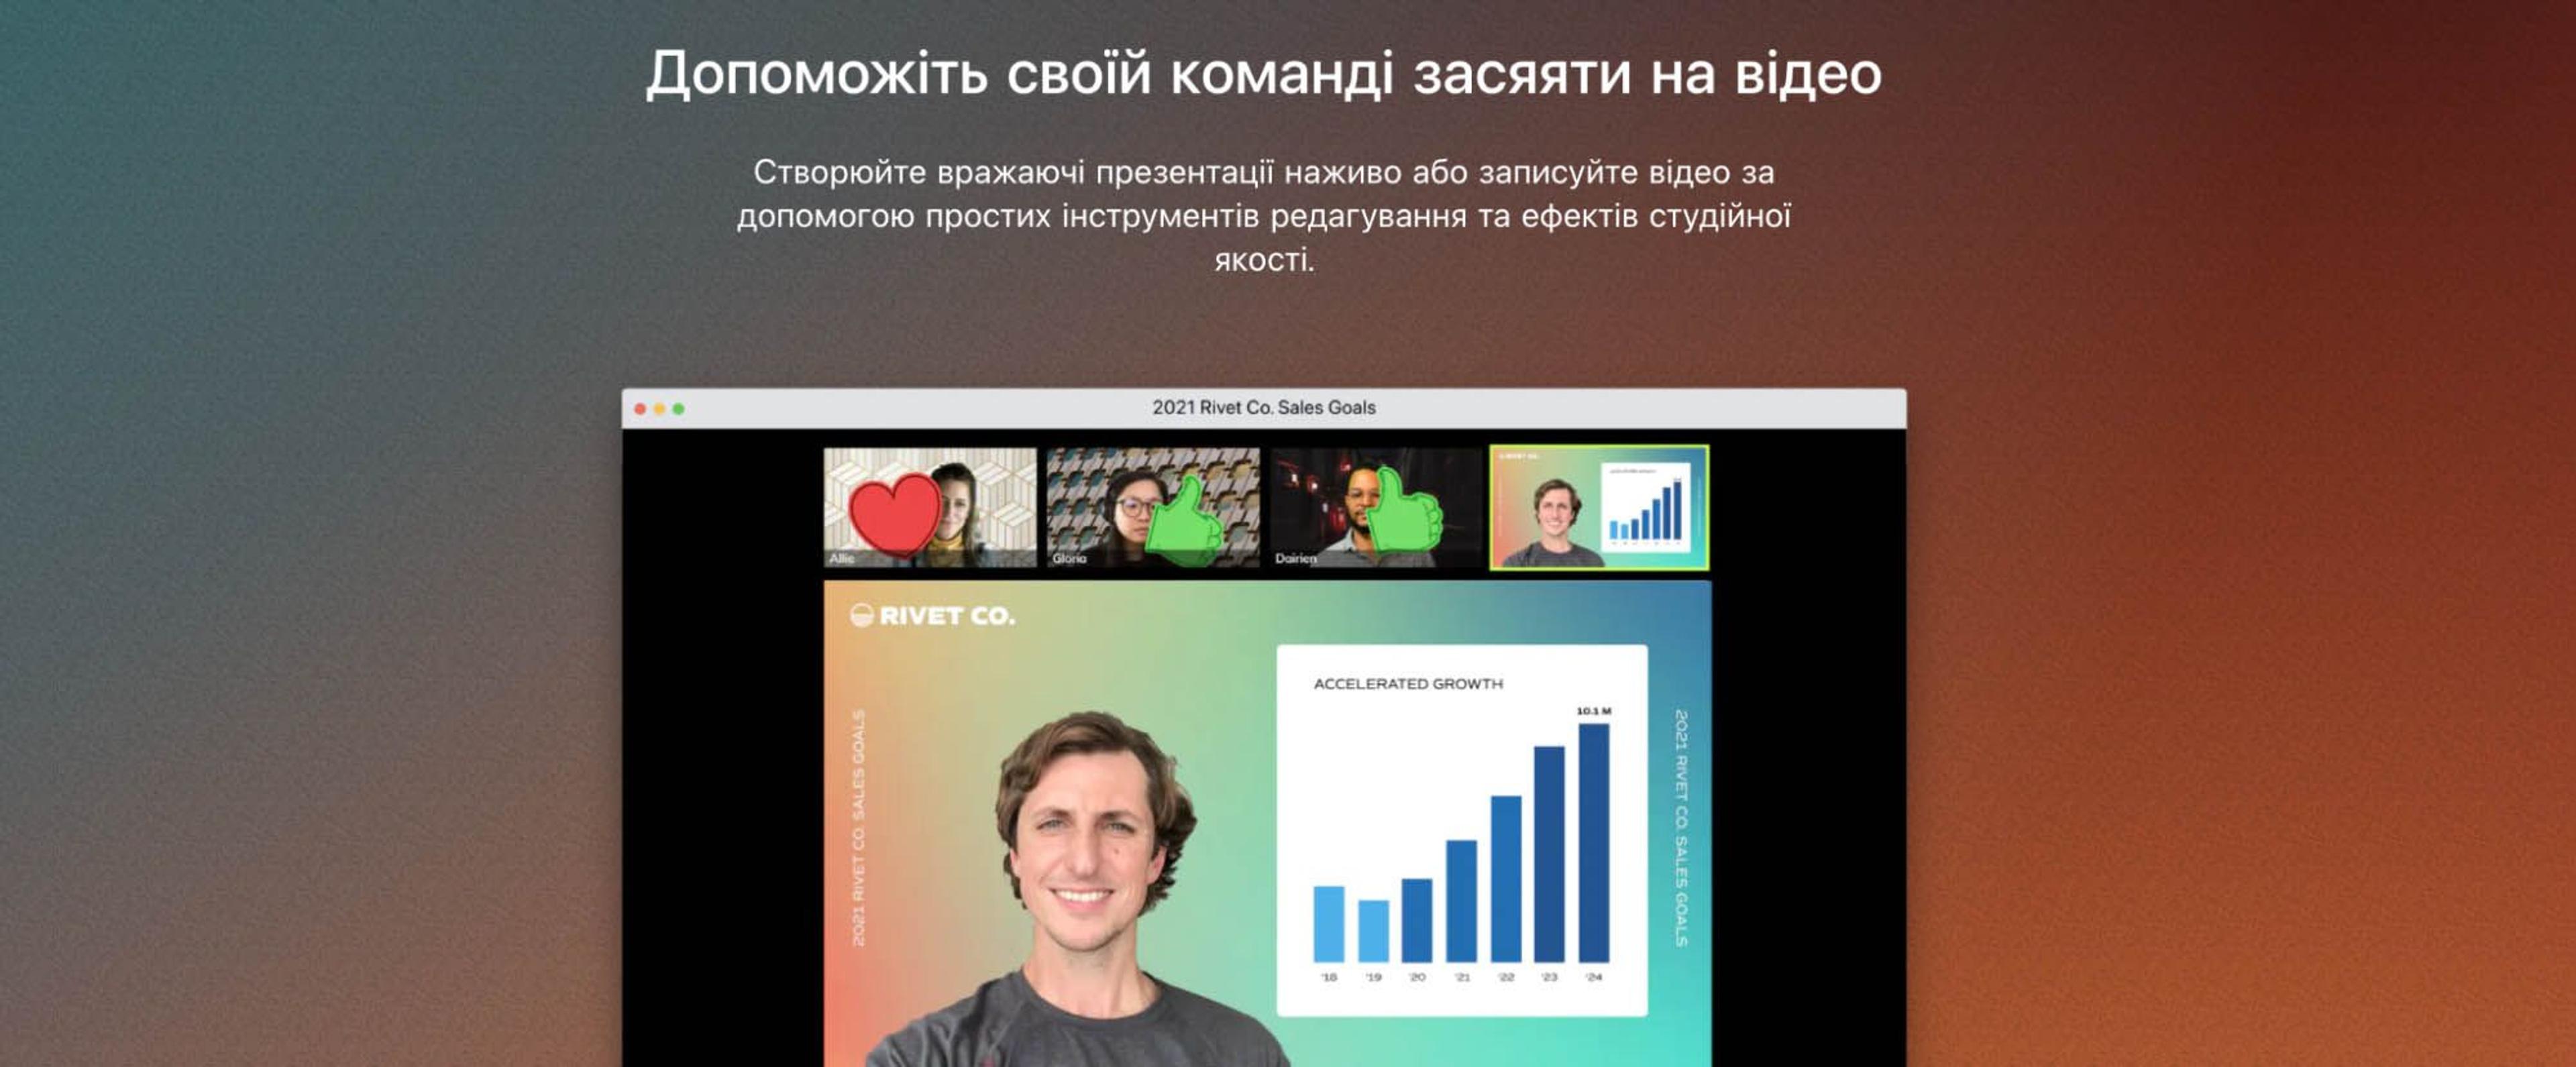 mmhmm website in Ukrainian showing mmhmm product in use in a video call